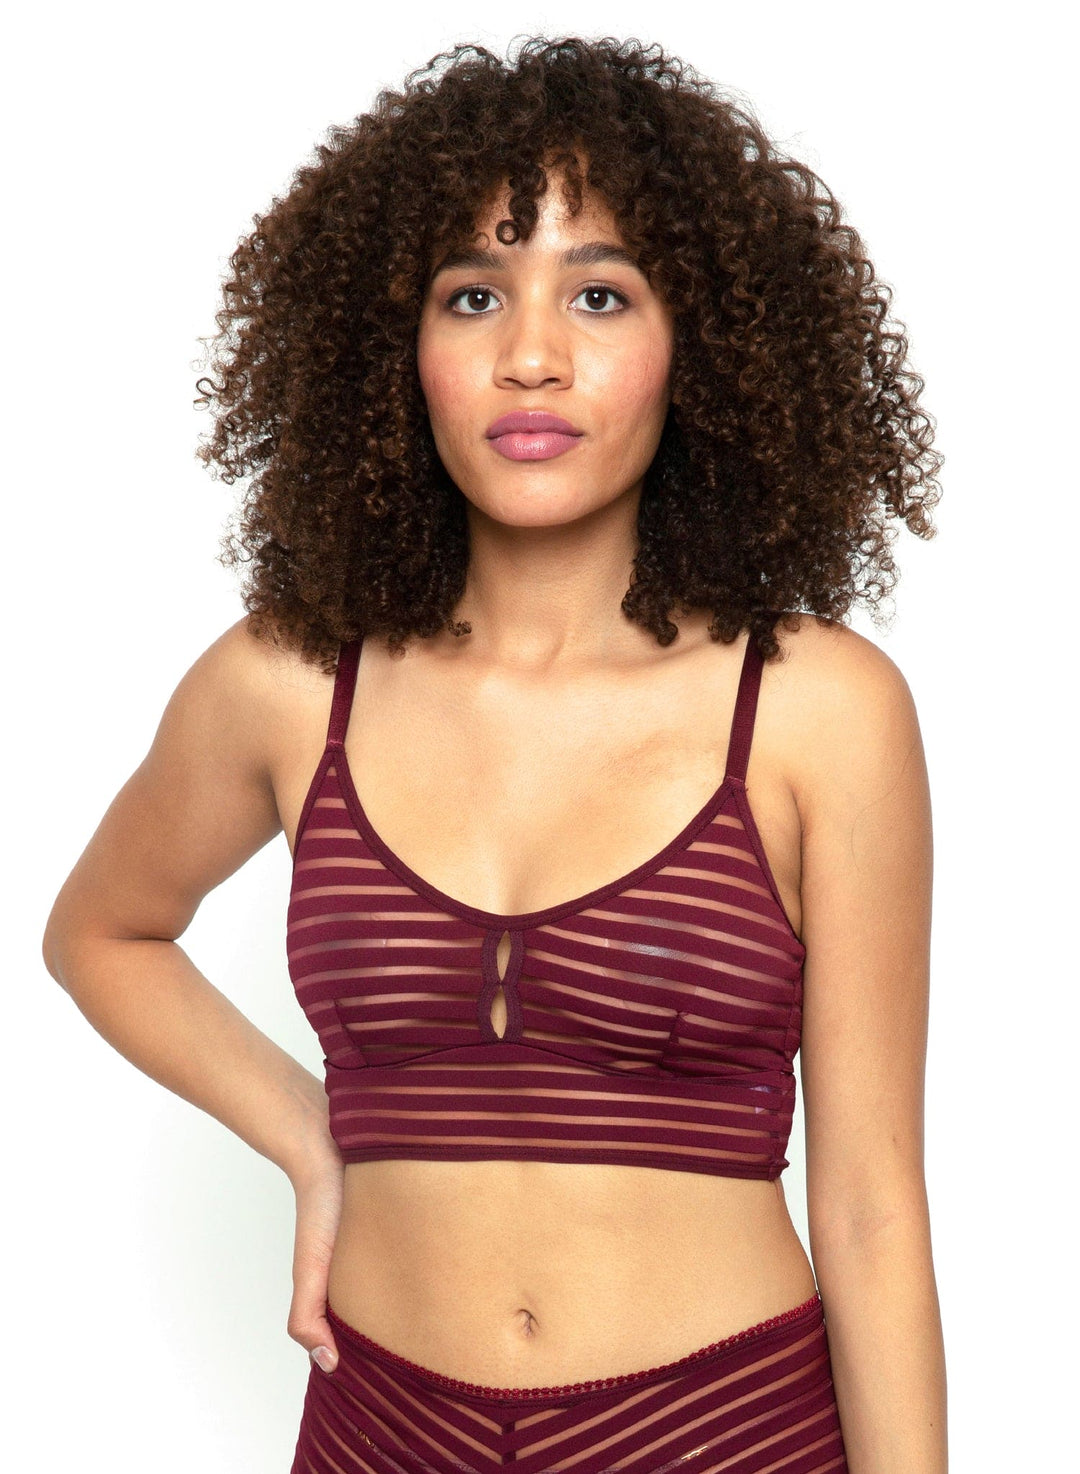 Classic bralet - Shadow Stripes - Cameo Clothing Line